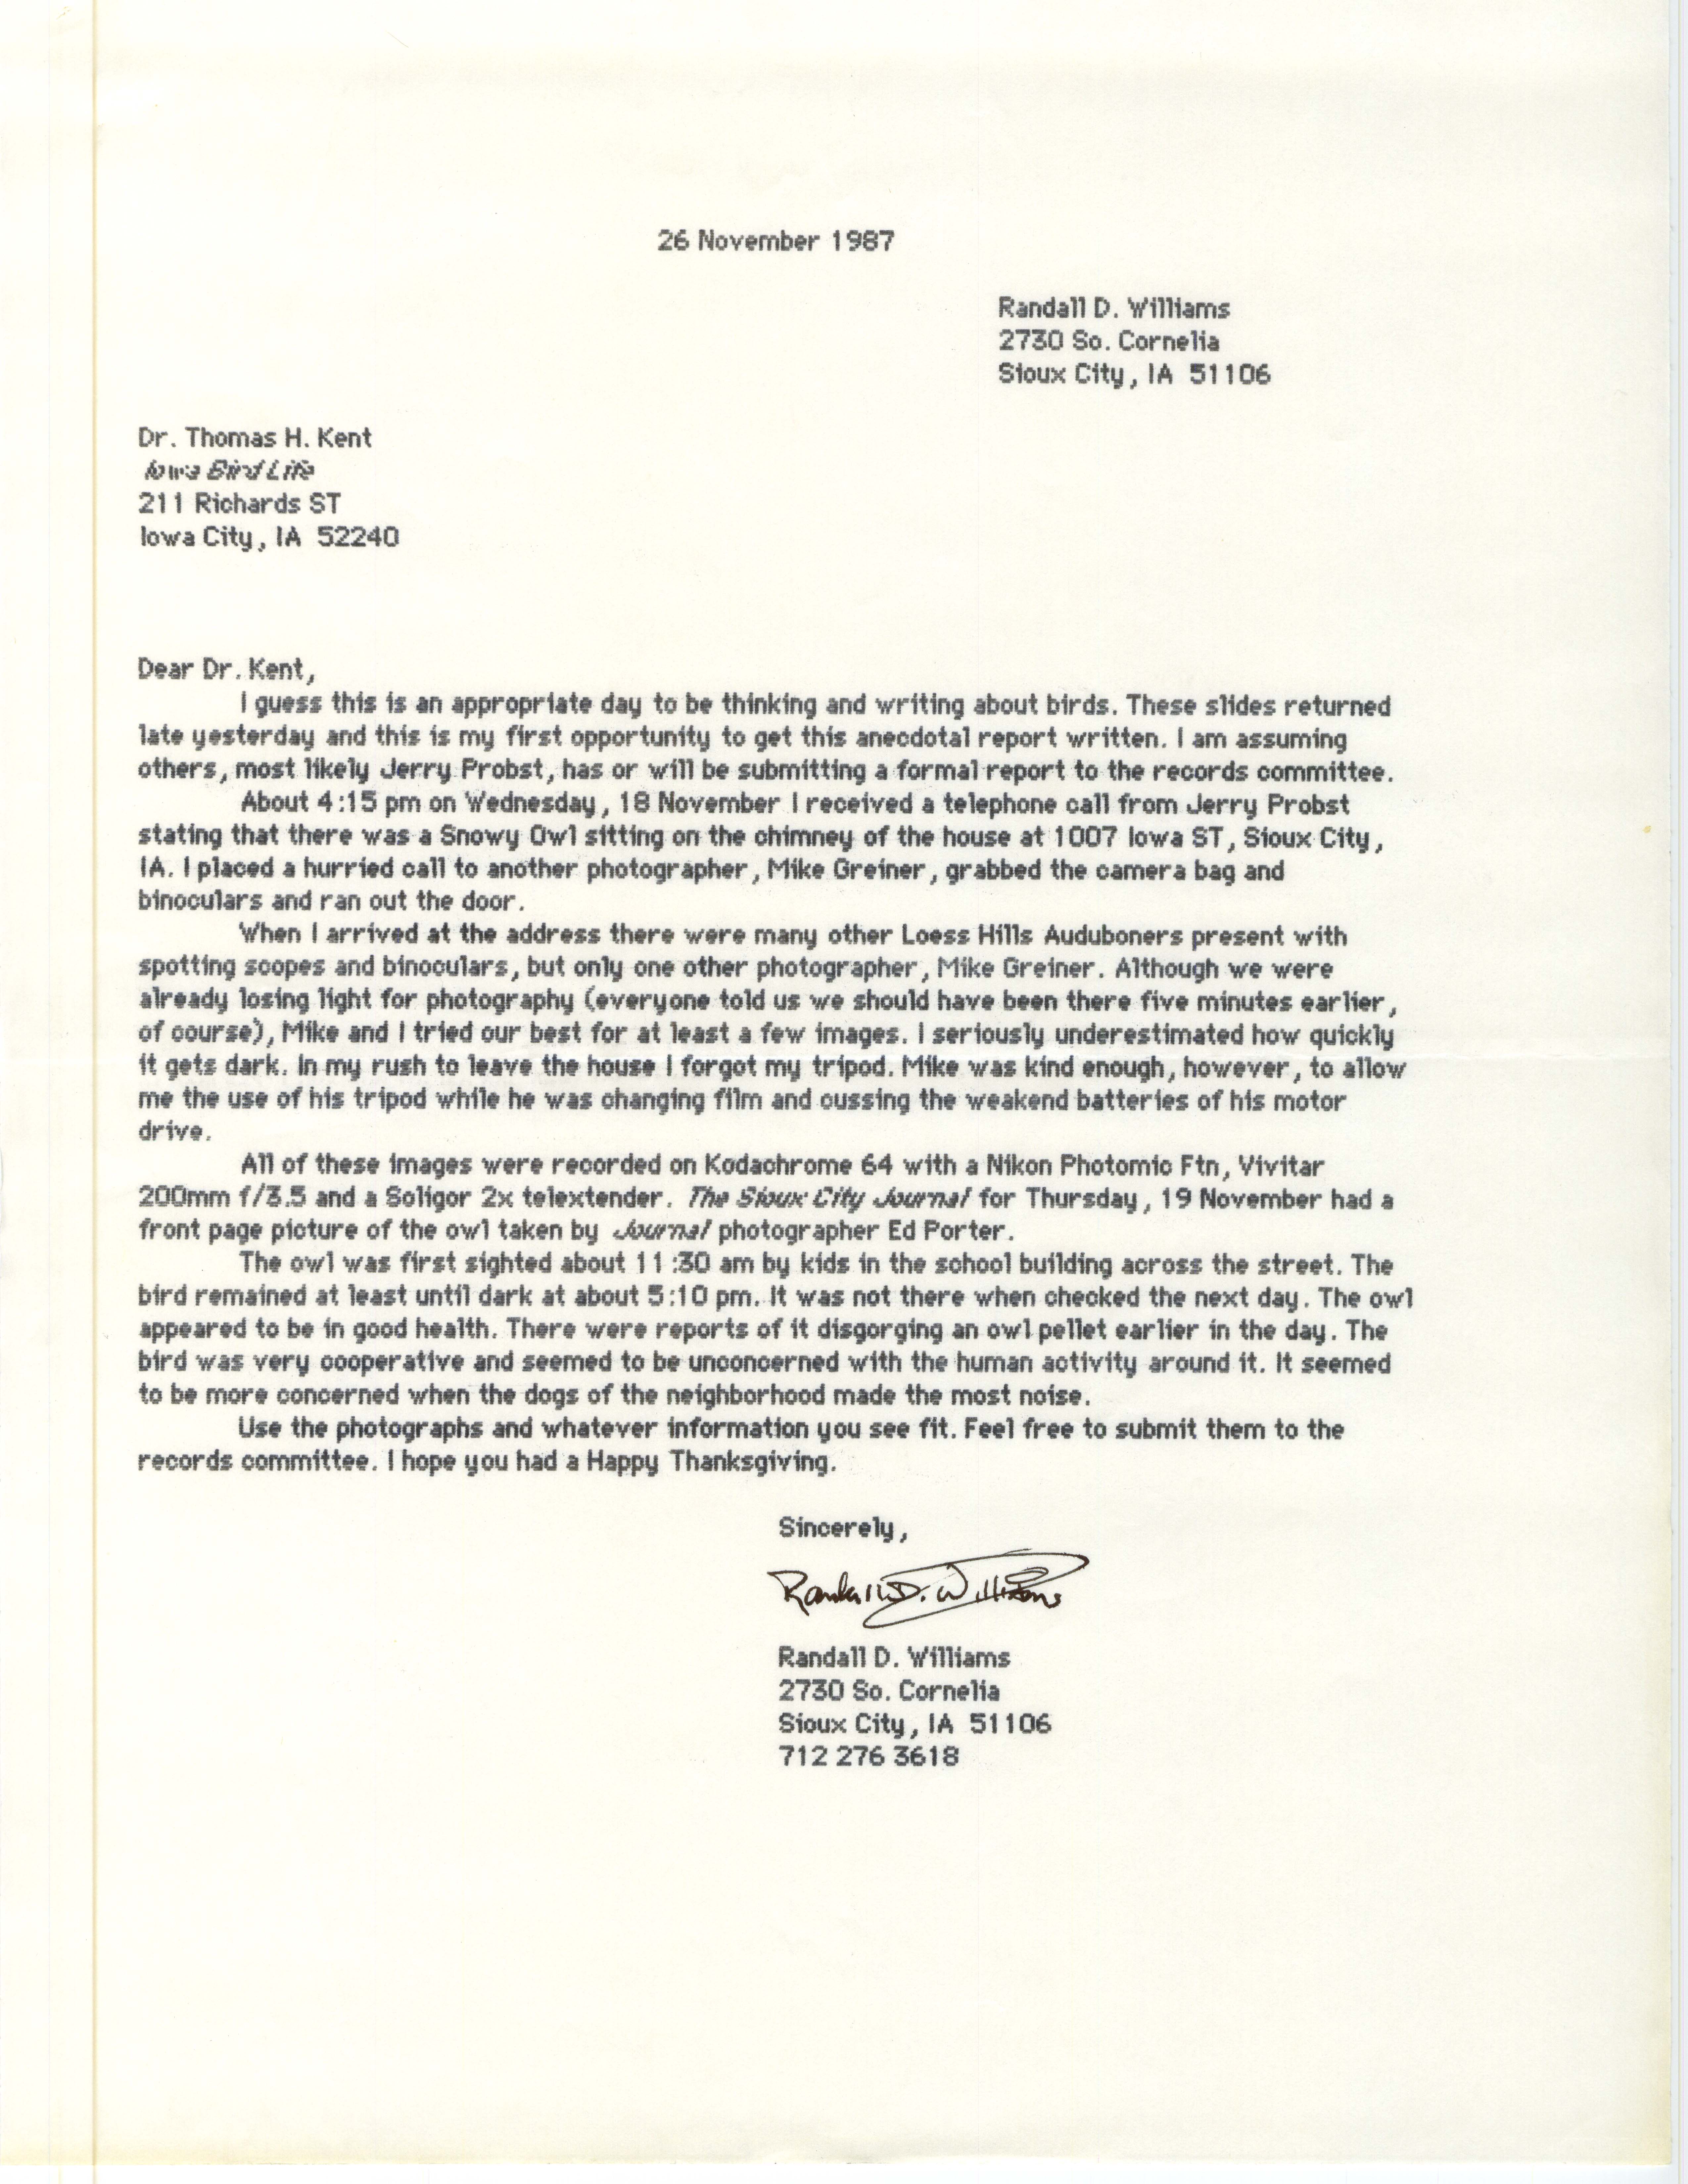 Randall D. Williams letter to Thomas H. Kent regarding a Snowy Owl sighting in Sioux City, November 26, 1987 